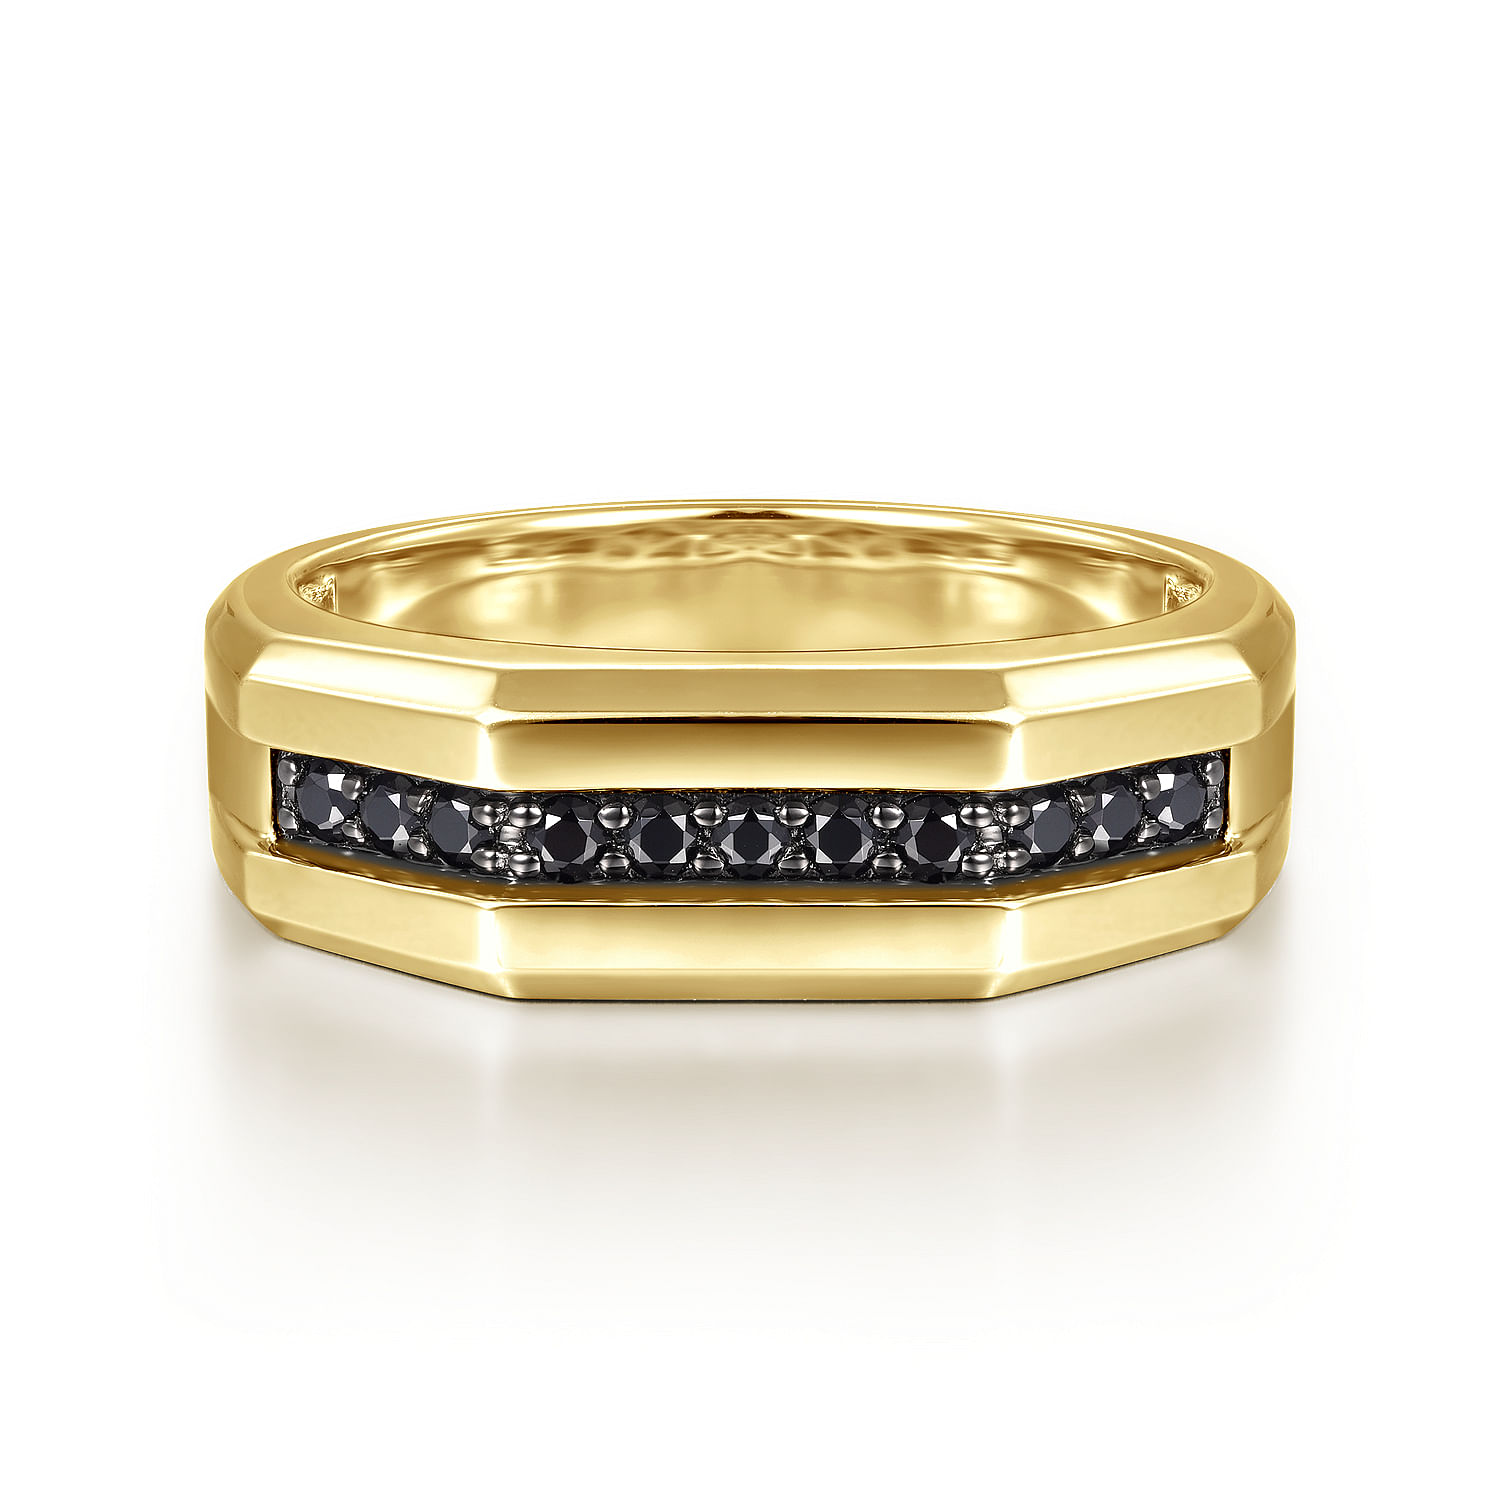 14K Yellow Gold Ring with Black Diamond Inlay in High Polished Finish